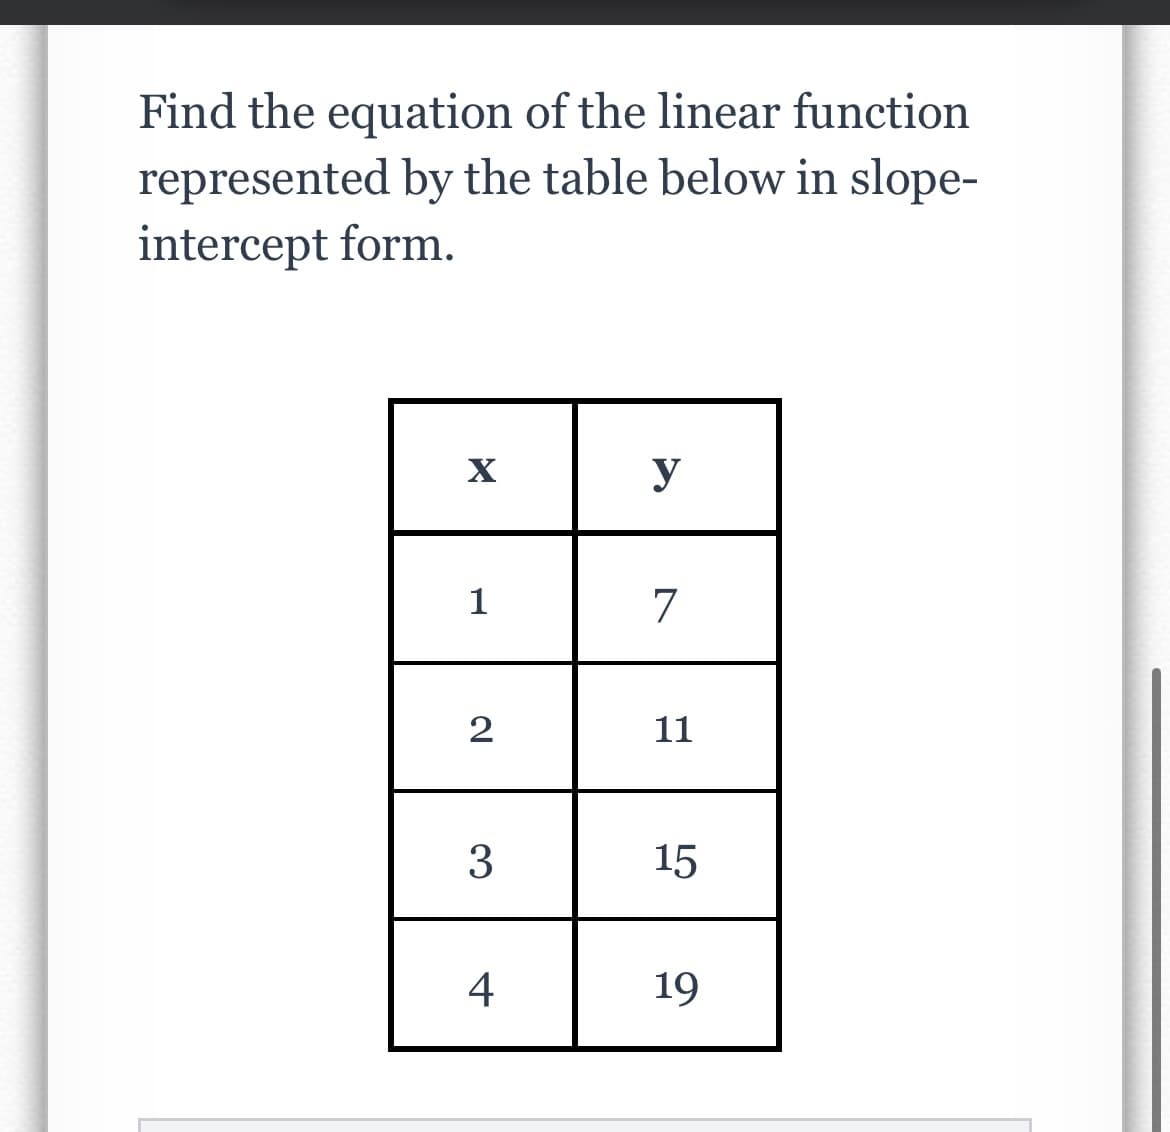 Find the equation of the linear function
represented by the table below in slope-
intercept form.
X
1
2
3
4
y
7
11
15
19